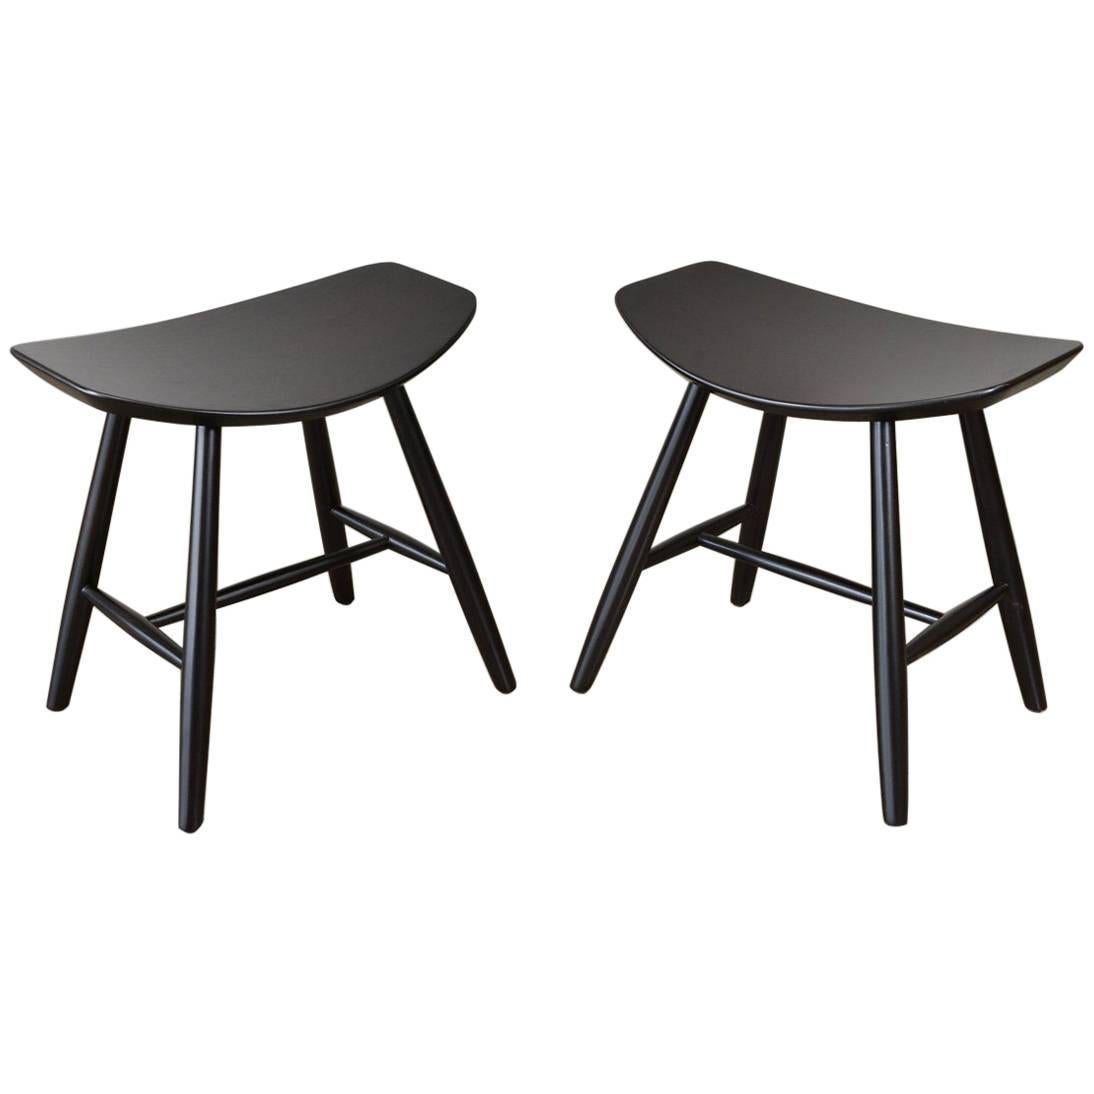 Pair of J63 Stools by Ejvind Johansson for FDB Mobler